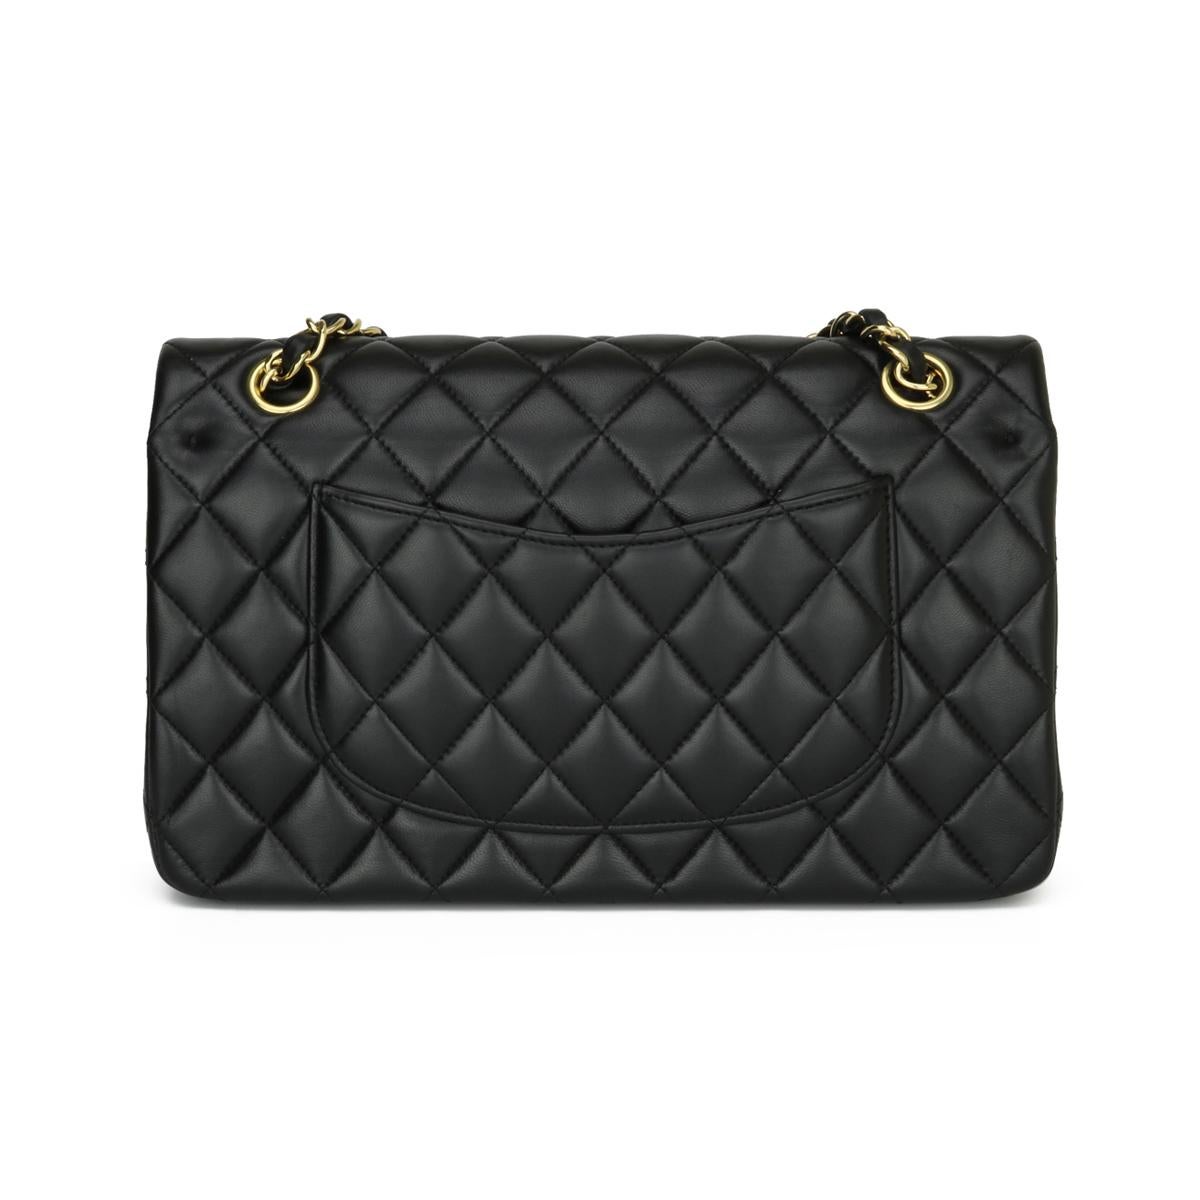 CHANEL Classic Double Flap Bag Medium Black Lambskin with Gold Hardware 2016.

This stunning bag is still in excellent condition, the bag still holds its original shape, and the hardware is very shiny. Leather still smells fresh as if new.

-